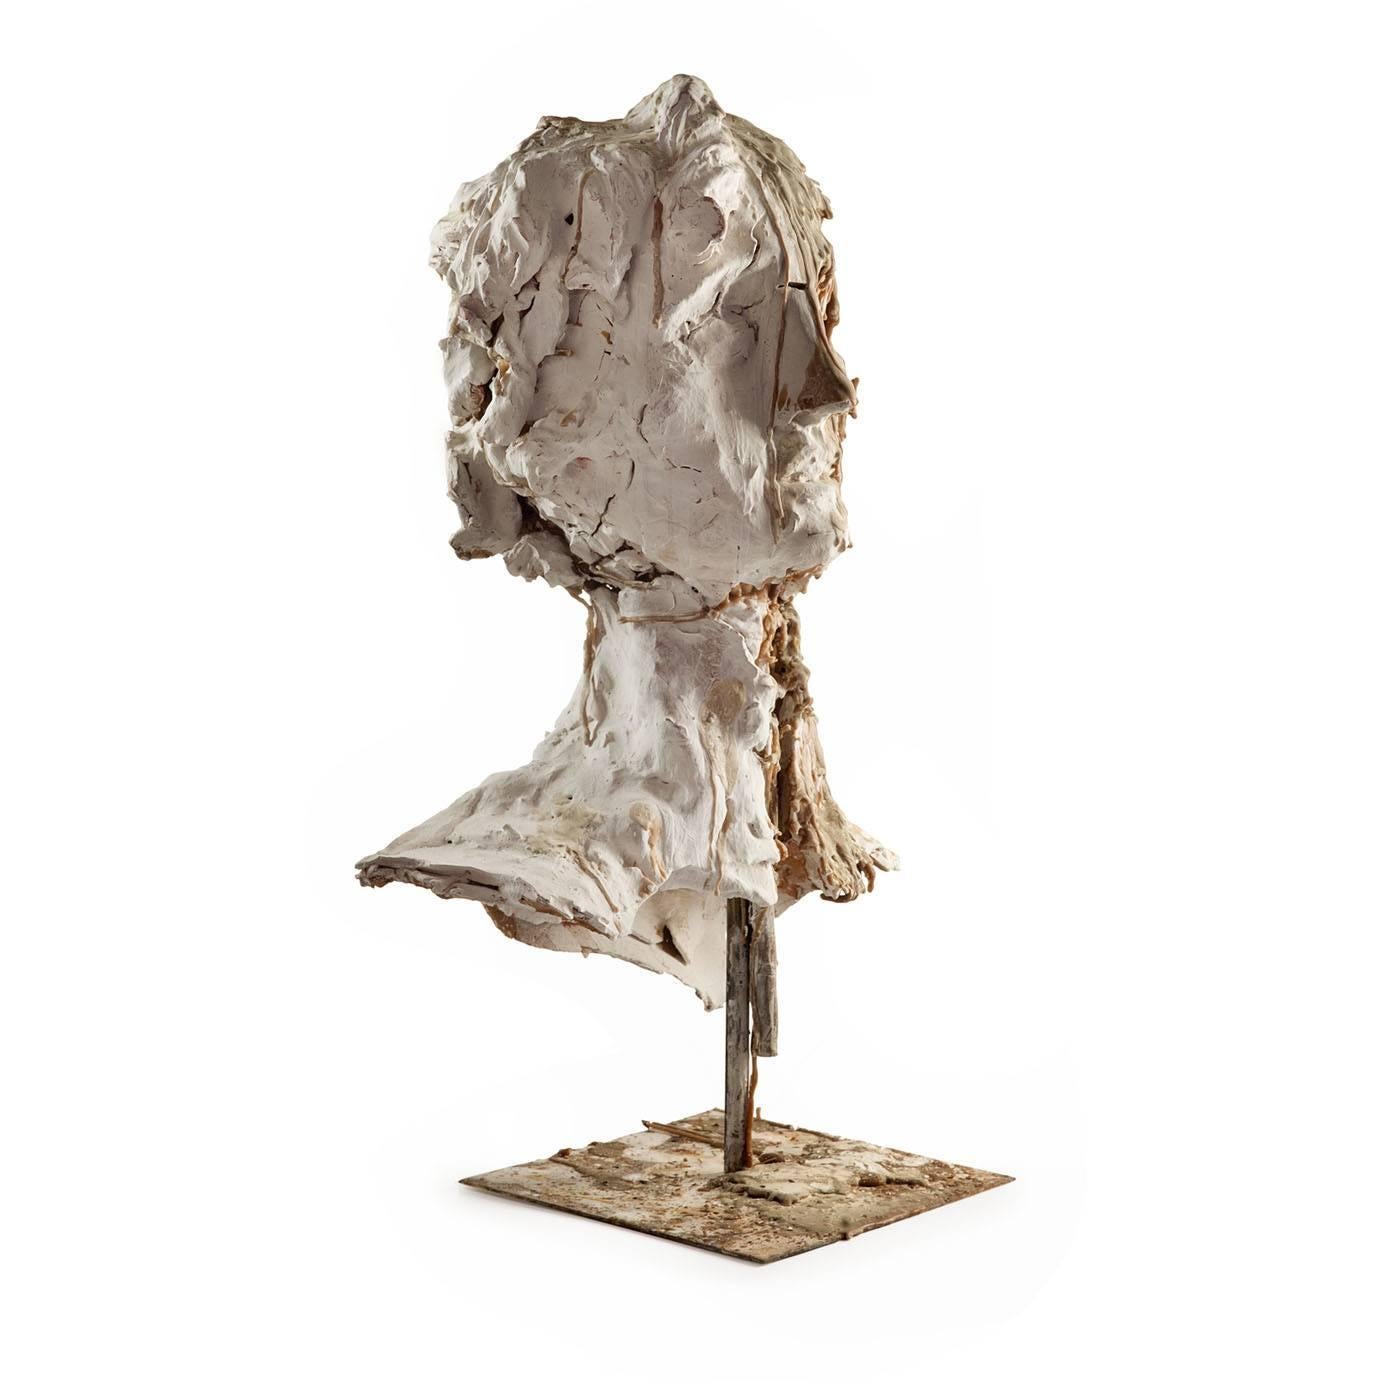 Interesting fragmented multi-colored sculpture made of wax and clay on an iron base, portraying the mythical Dionysius, also in terracotta with white wax coating, such materials having been used to illustrate the link between earth and nature.